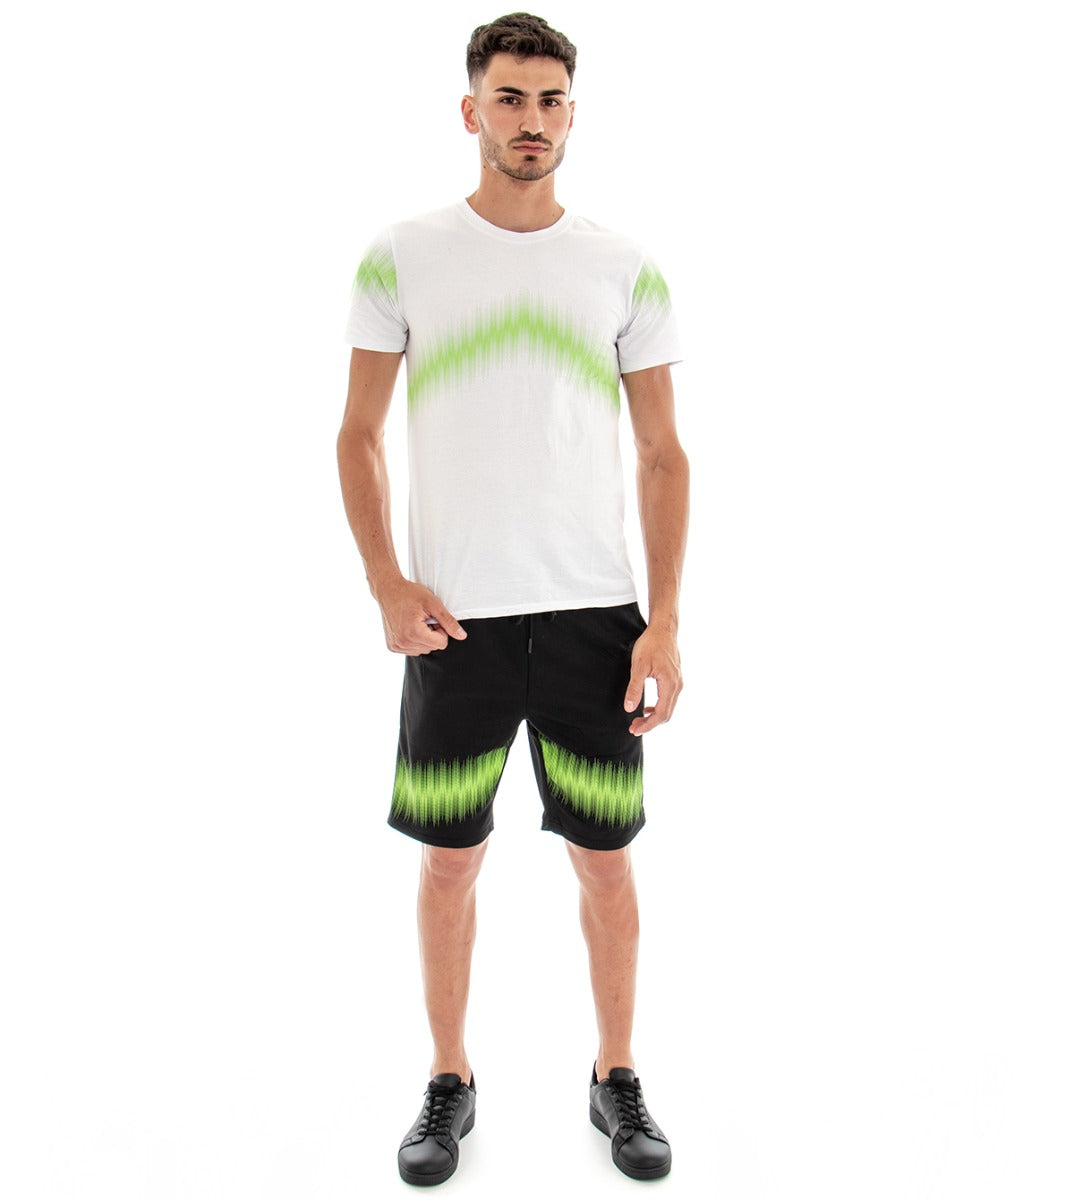 Complete Coordinated Set for Men with White Bermuda T-Shirt GIOSAL-OU1603A